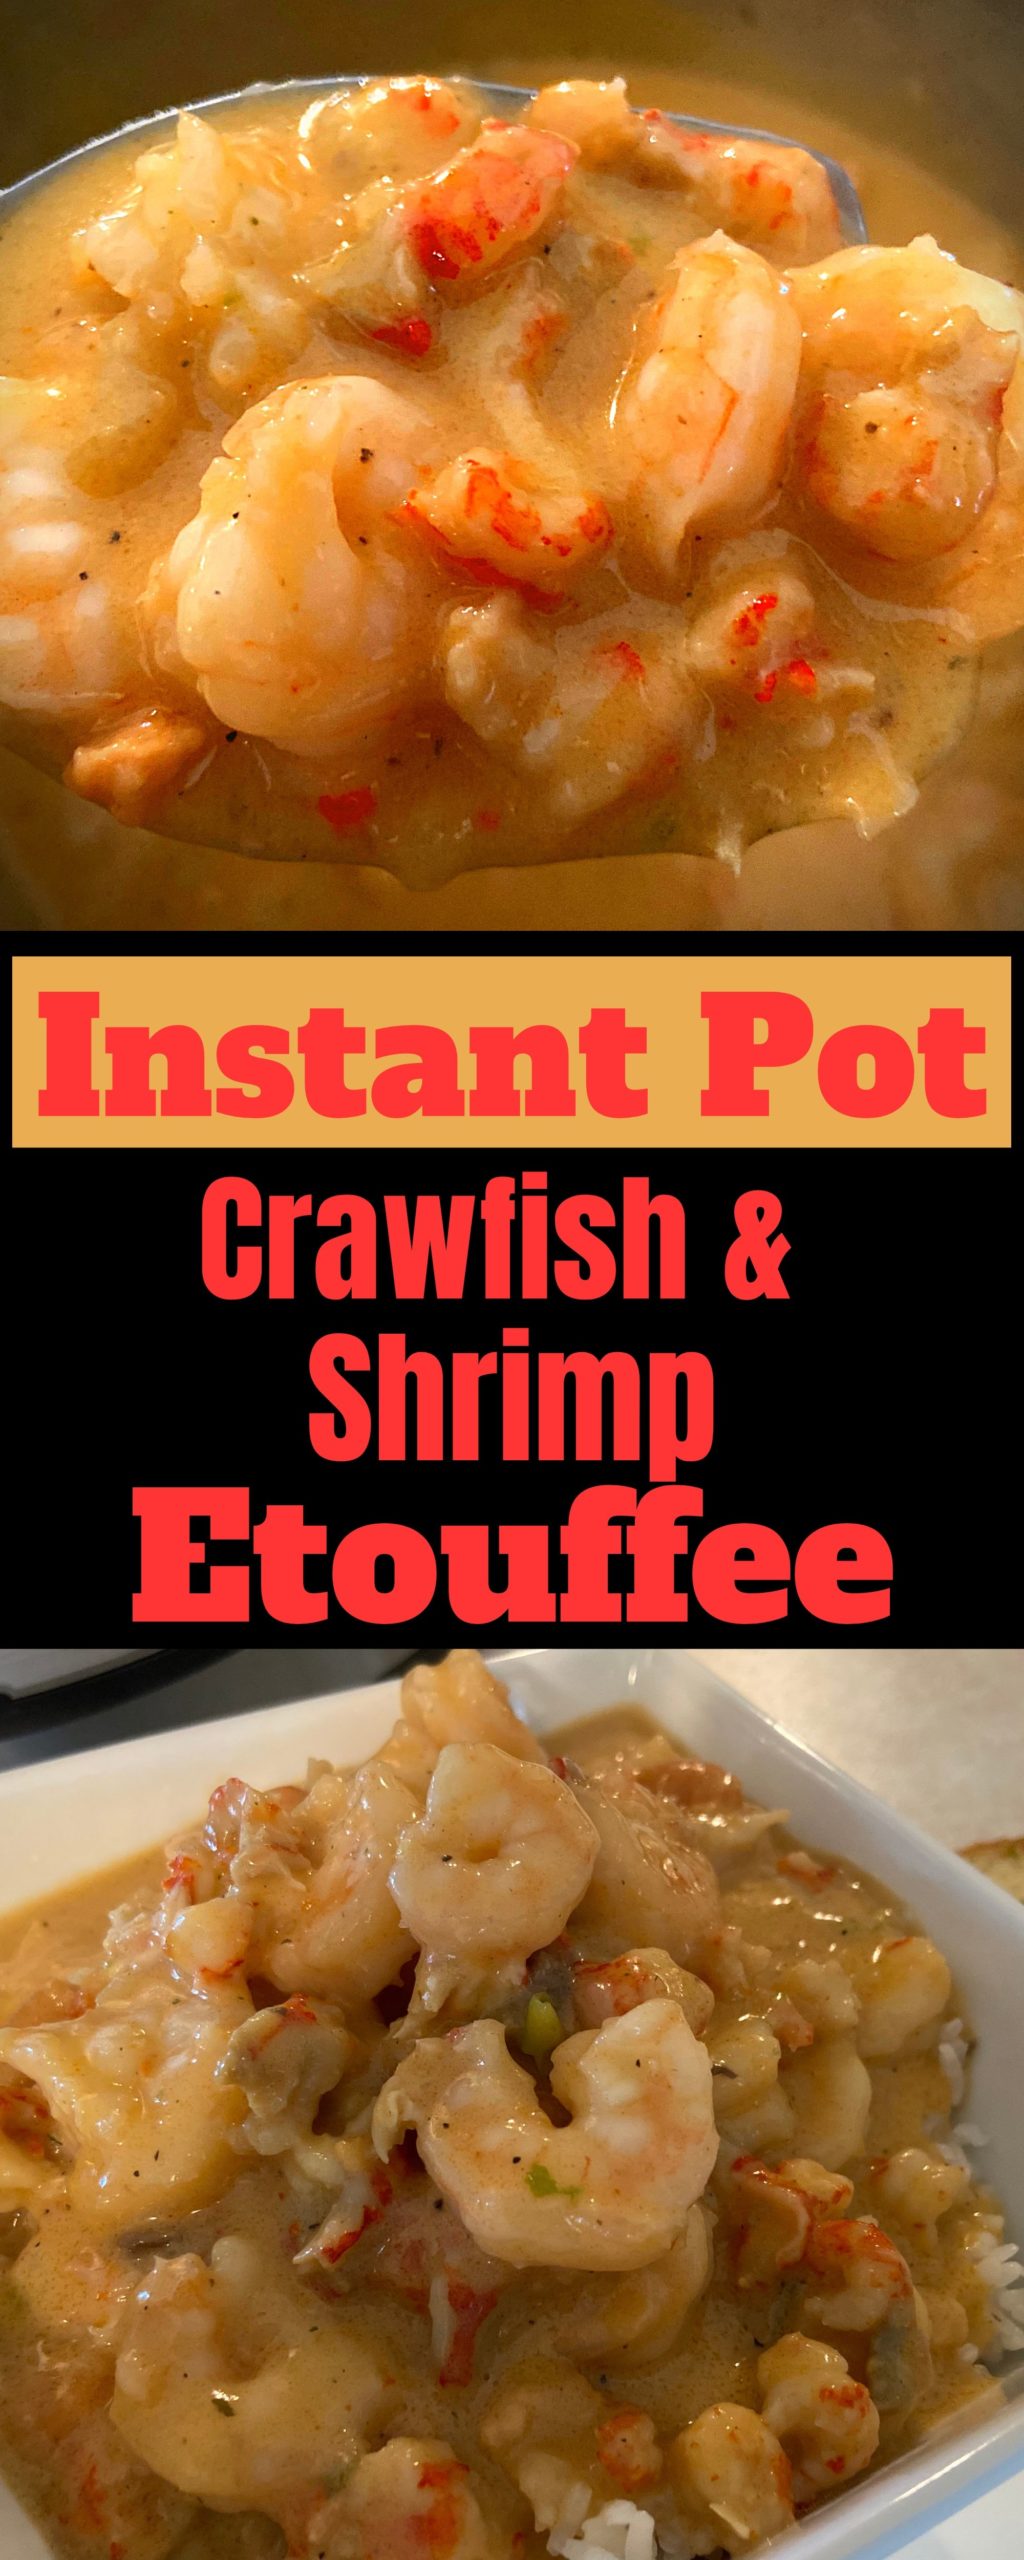 A white bowl filled with white rice topped with Crawfish and Shrimp Etouffee.